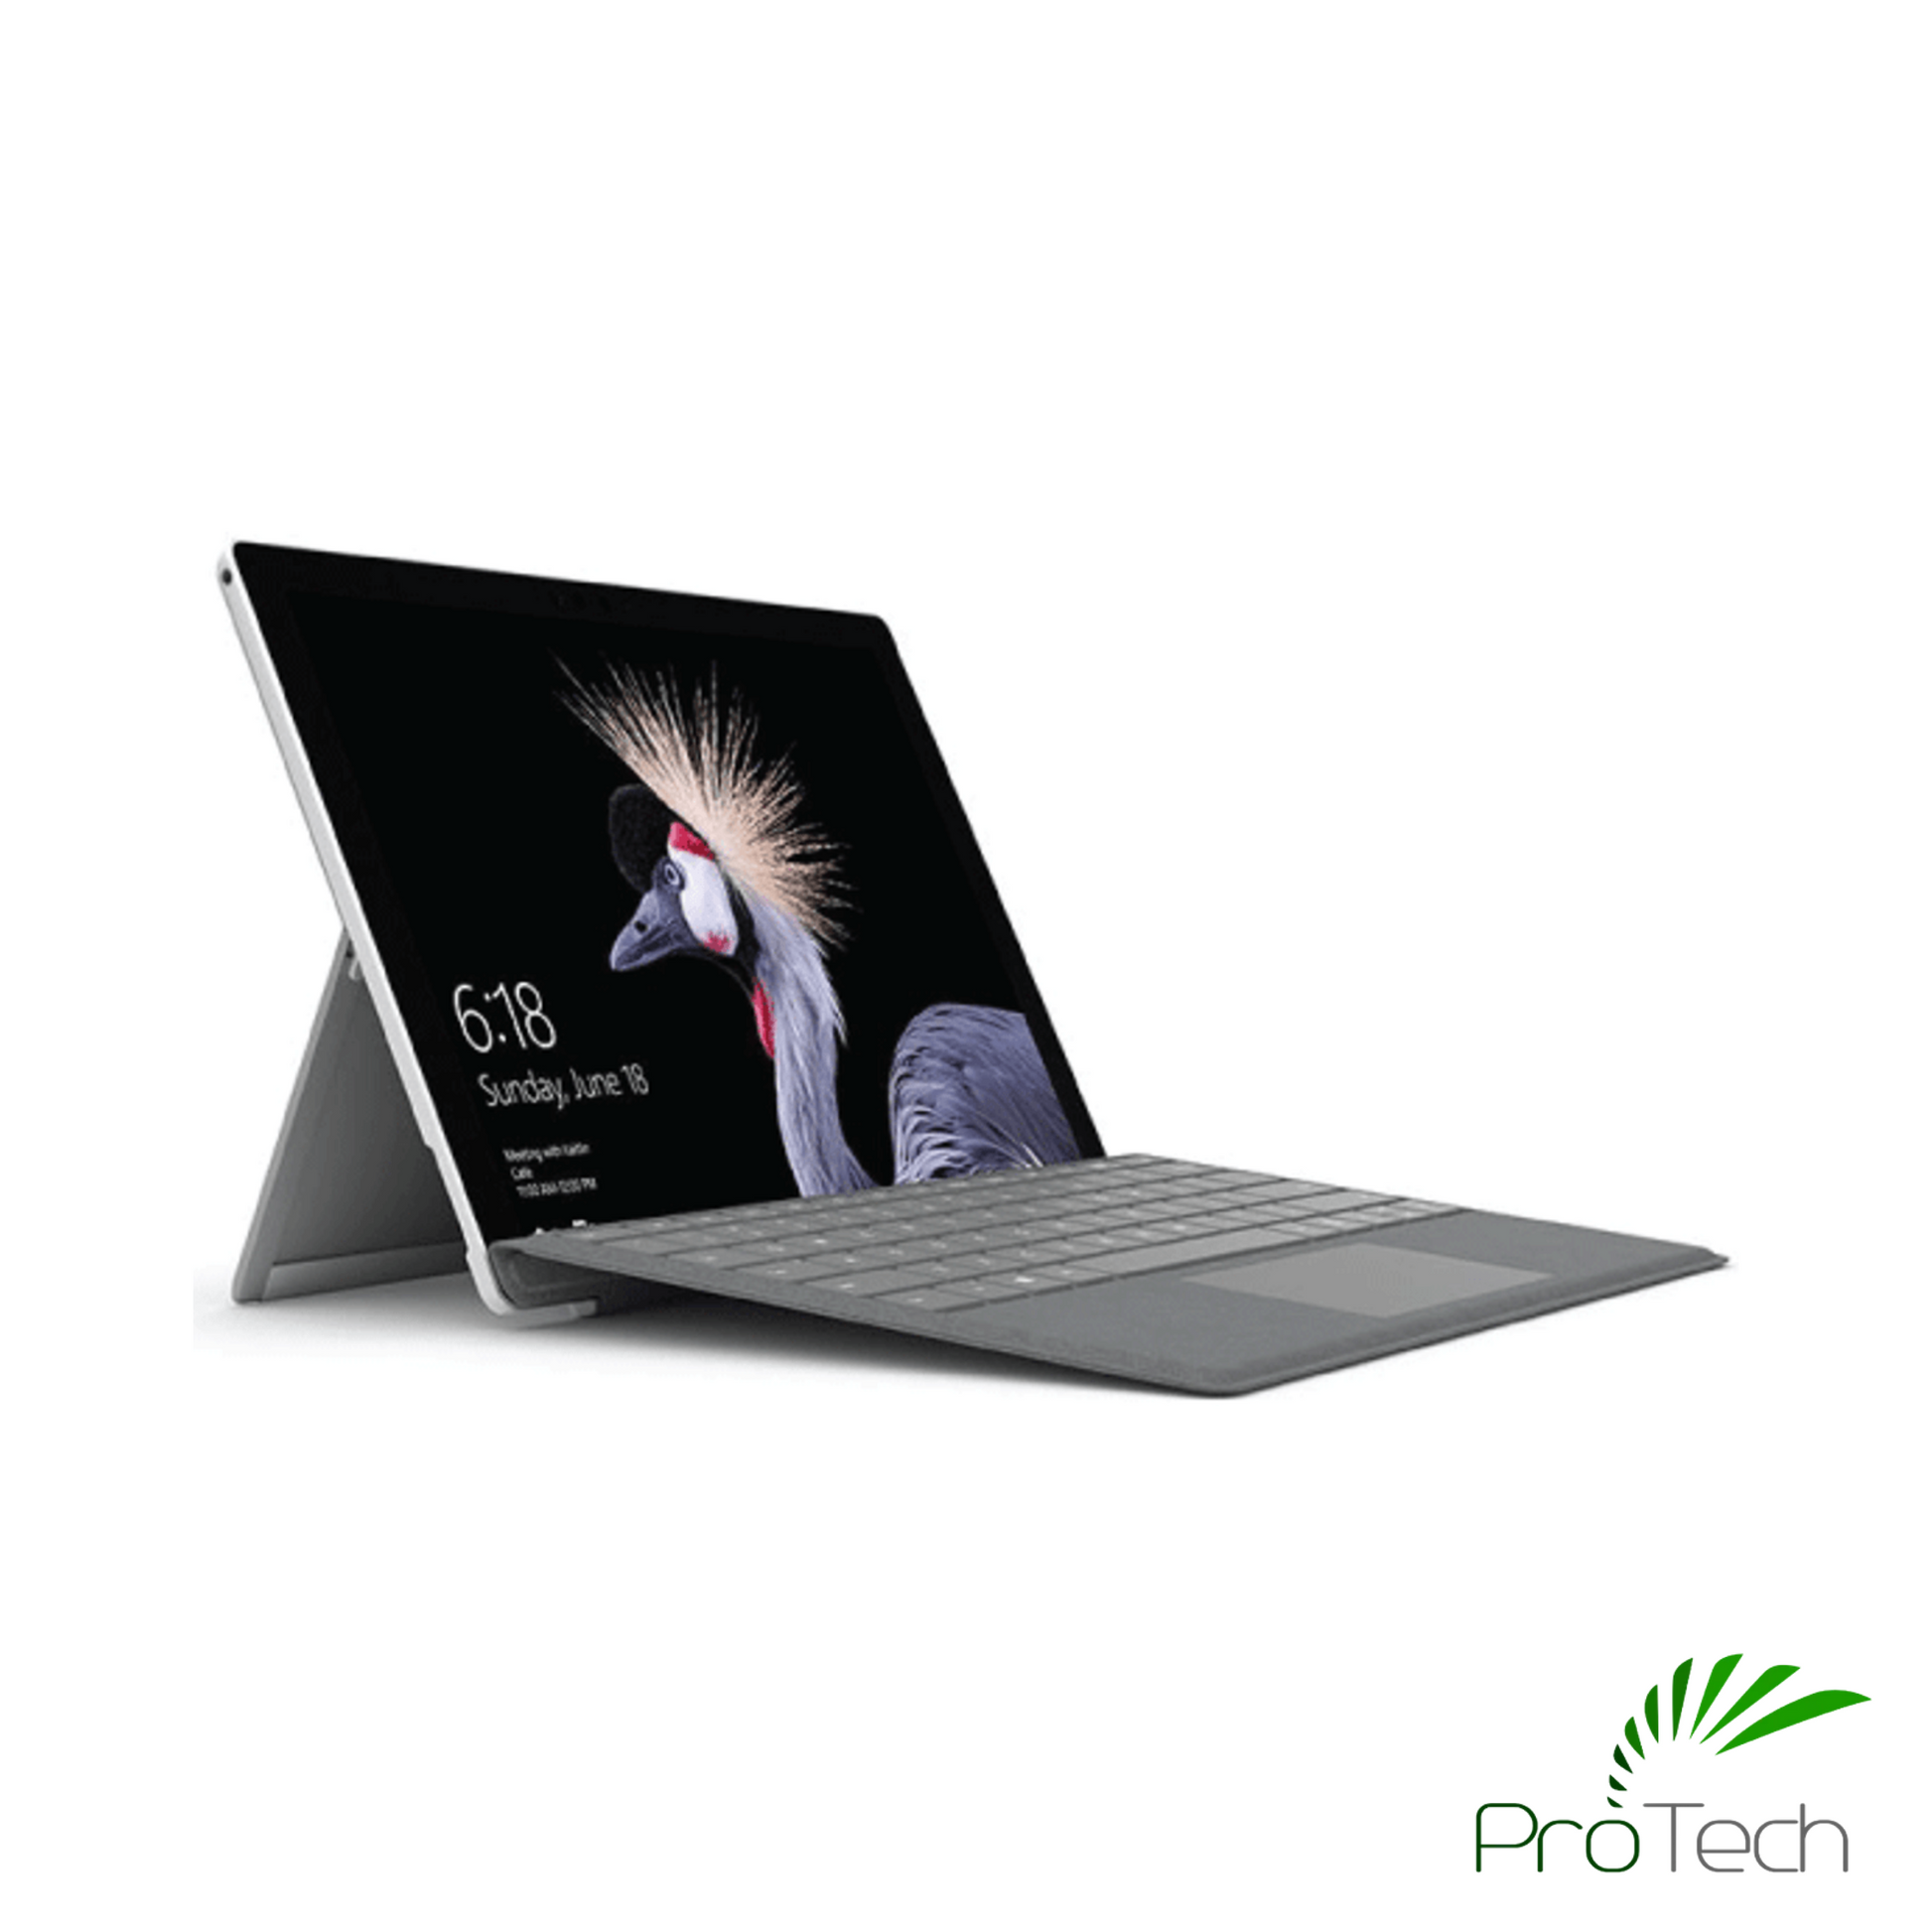 Microsoft Surface Pro 3 | Core i5 | 4GB RAM | 128GB SSD ProTech I.T. Solutions